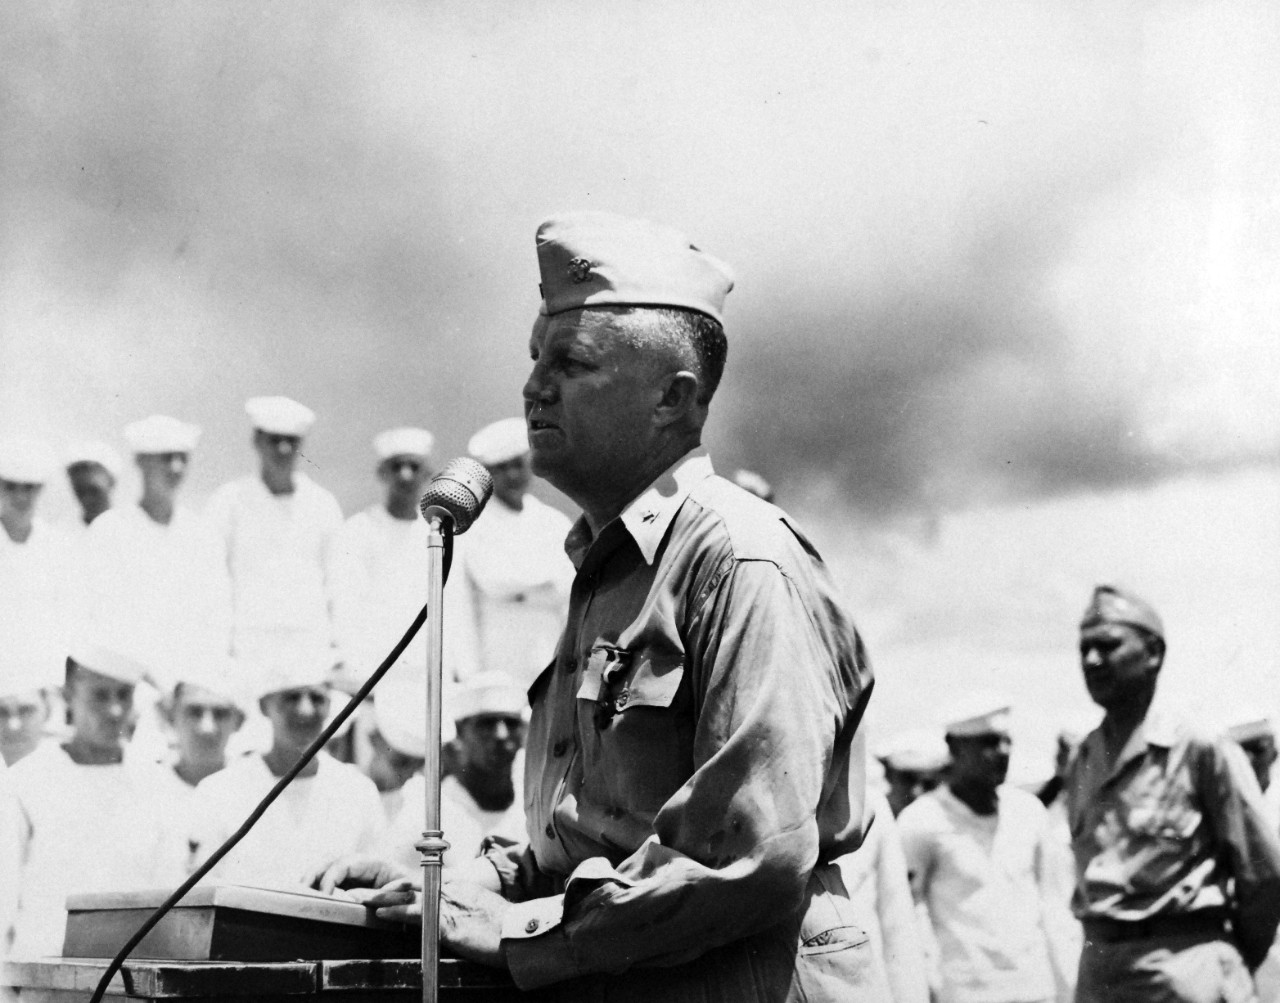 80-G-216848: USS Columbia (CL-56), February 1944. Battle of Empress Augusta Bay, November 1-2, 1943. Speech at the presentation of awards to officers and crew. Shown: Captain Frank E. Beatty, USN, giving thanks after receiving the Navy Cross, Feb...